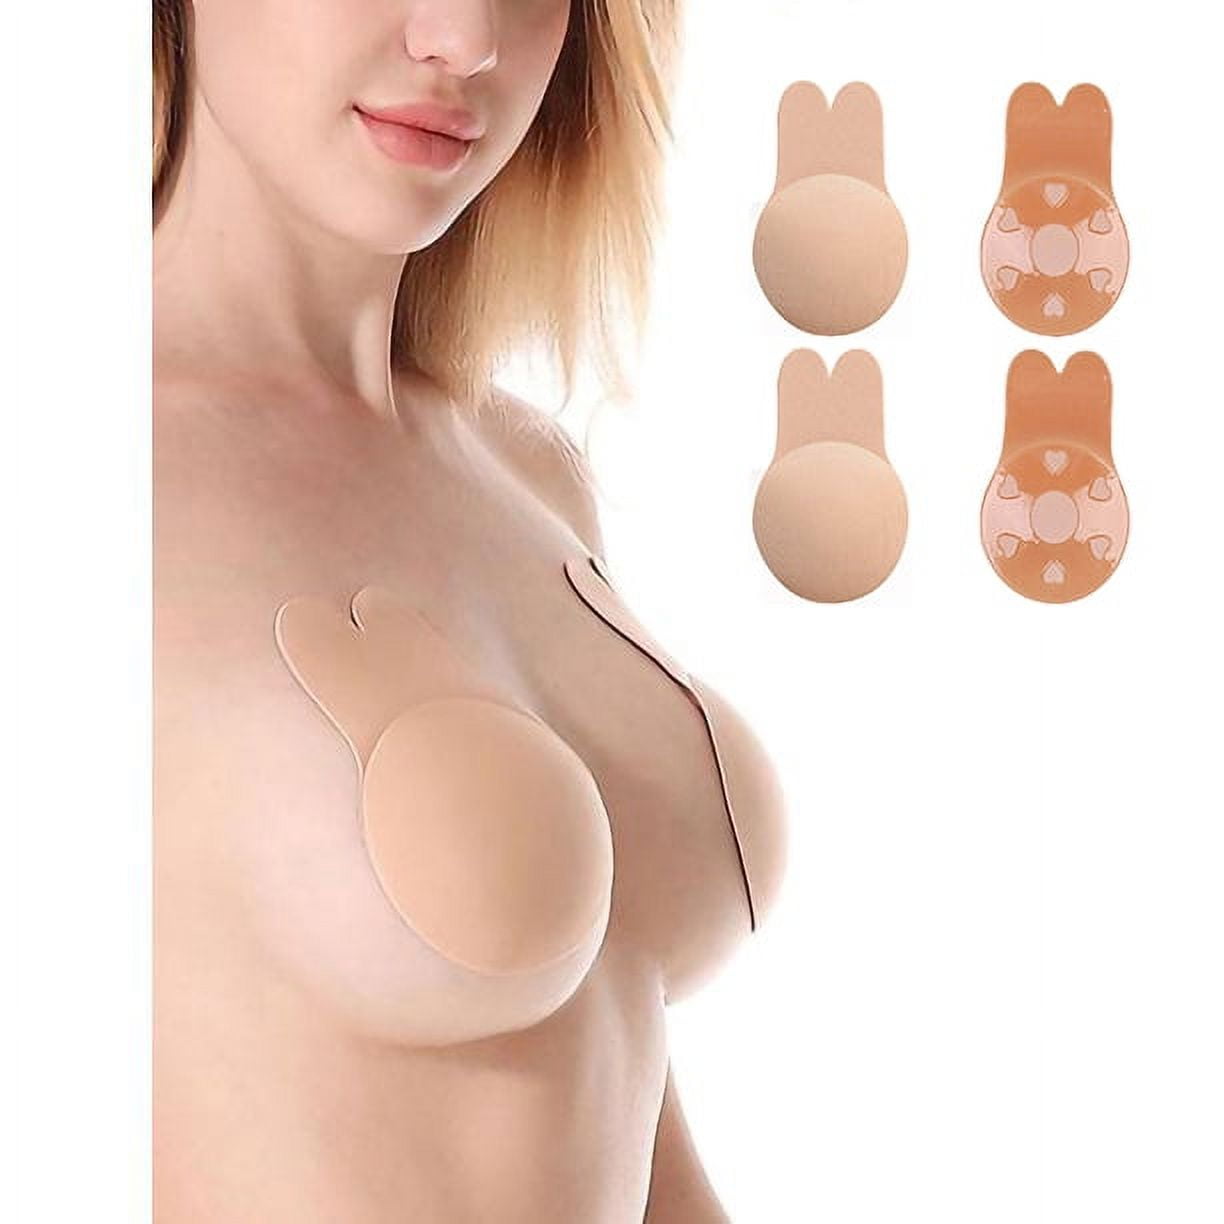 Bare Lifts Quality 10pcs Invisible Breast/Lift Strapless Tape Bra